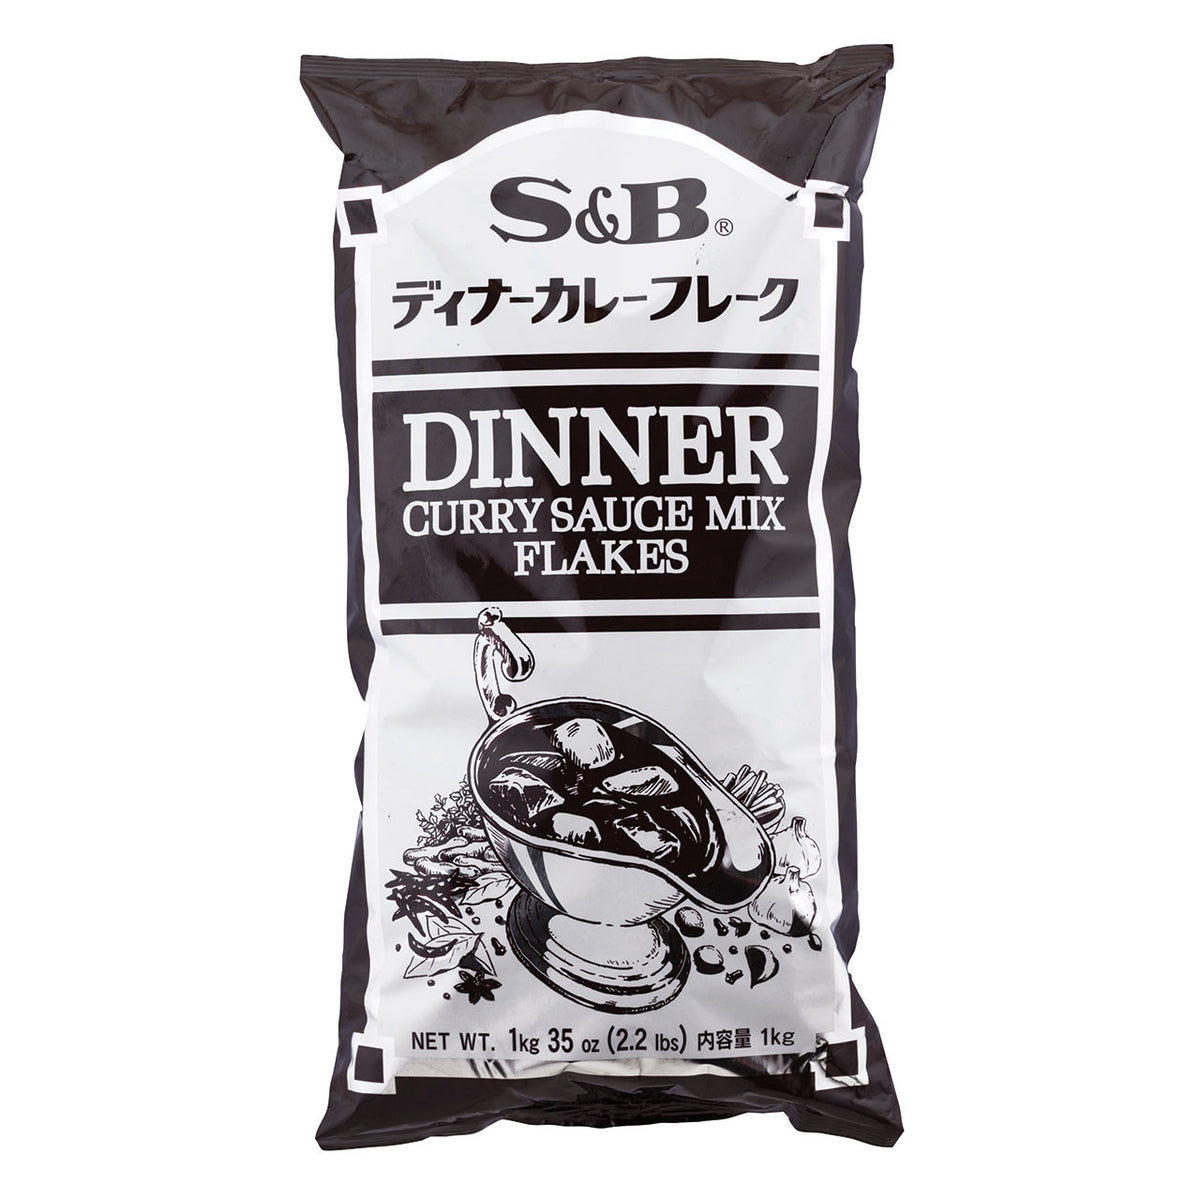 kg　Mix　Dinner　Curry　2.2　SB　Sauce　MTC　Kitchen　Curry　lb　Japanese-Style　—